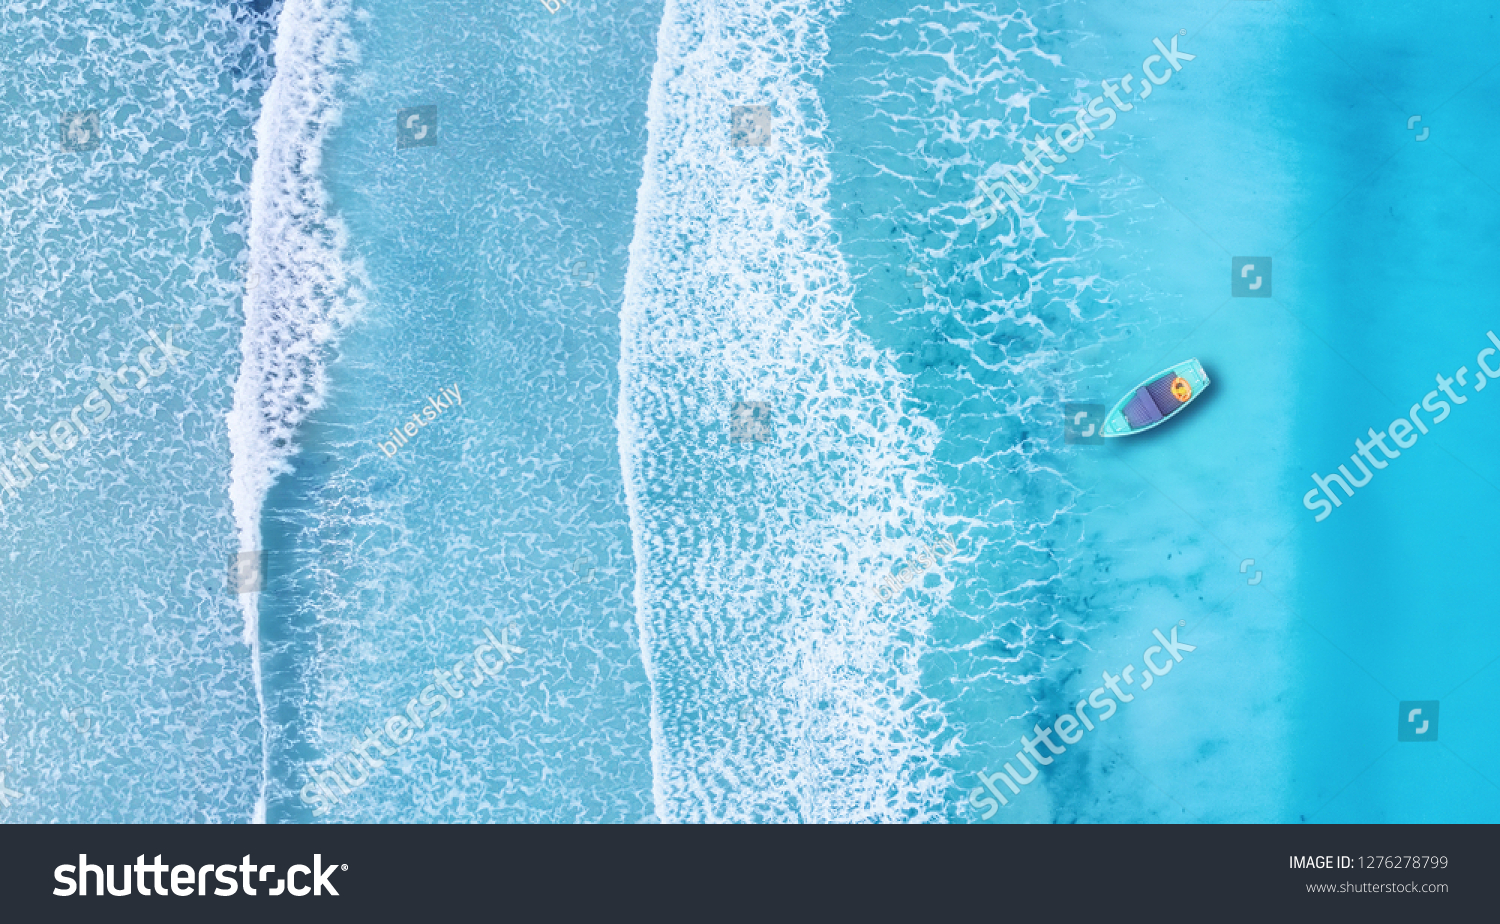 Beach and waves from top view. Turquoise water background from top view. Summer seascape from air. Top view from drone. Travel concept and idea #1276278799